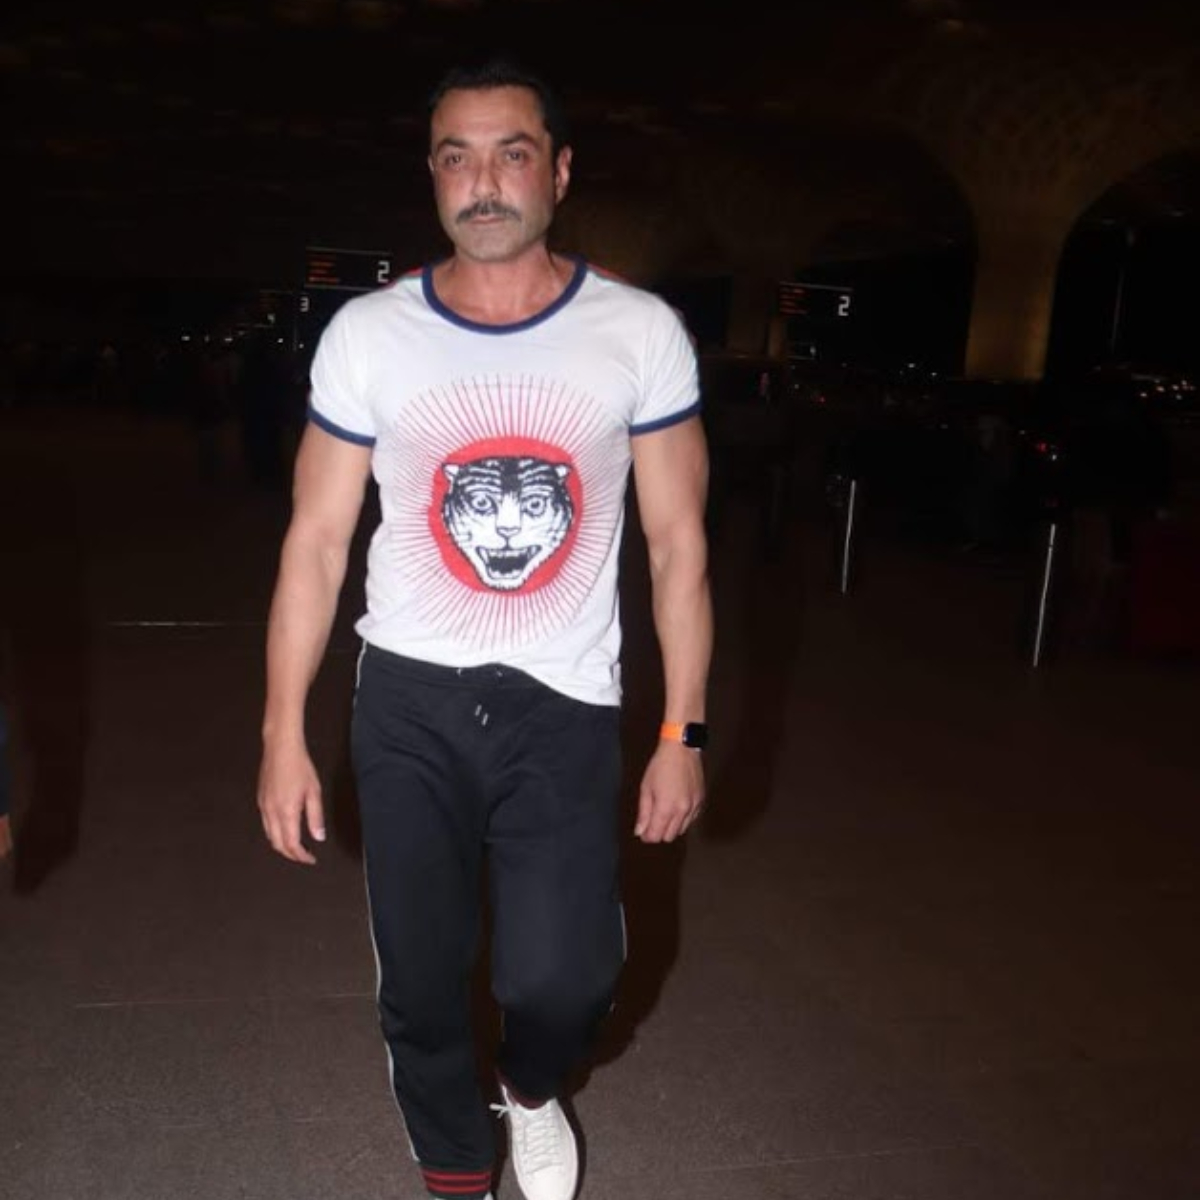 EXCLUSIVE: Bobby Deol to feature in Arth remake; Producer confirms they are in final discussions